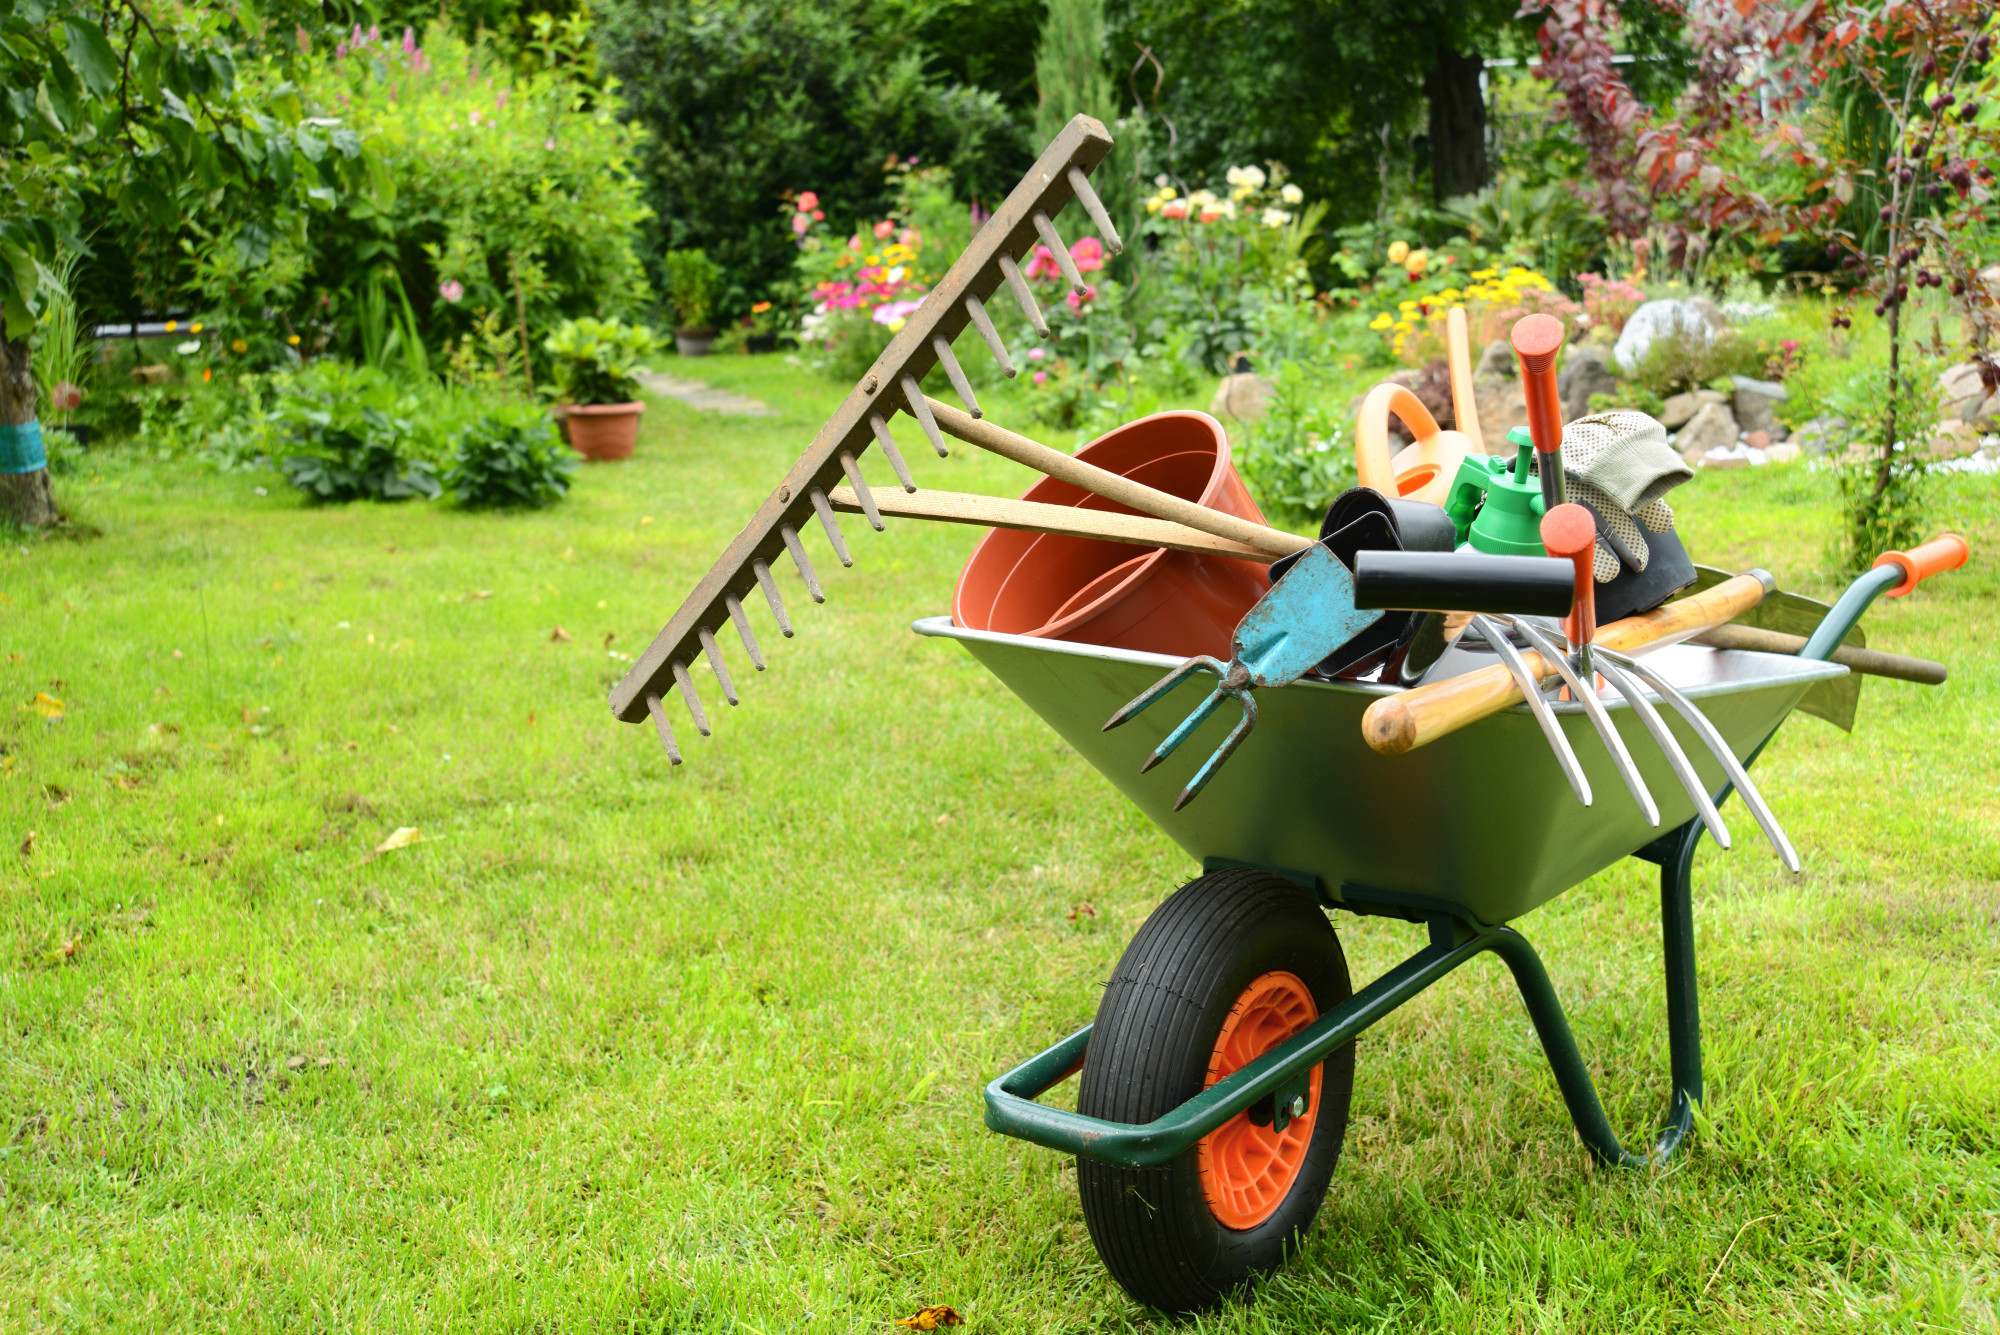 Gardening as a hobby or side business is much easier with useful gardening equipment. Keep these tools handy in your storage shed.